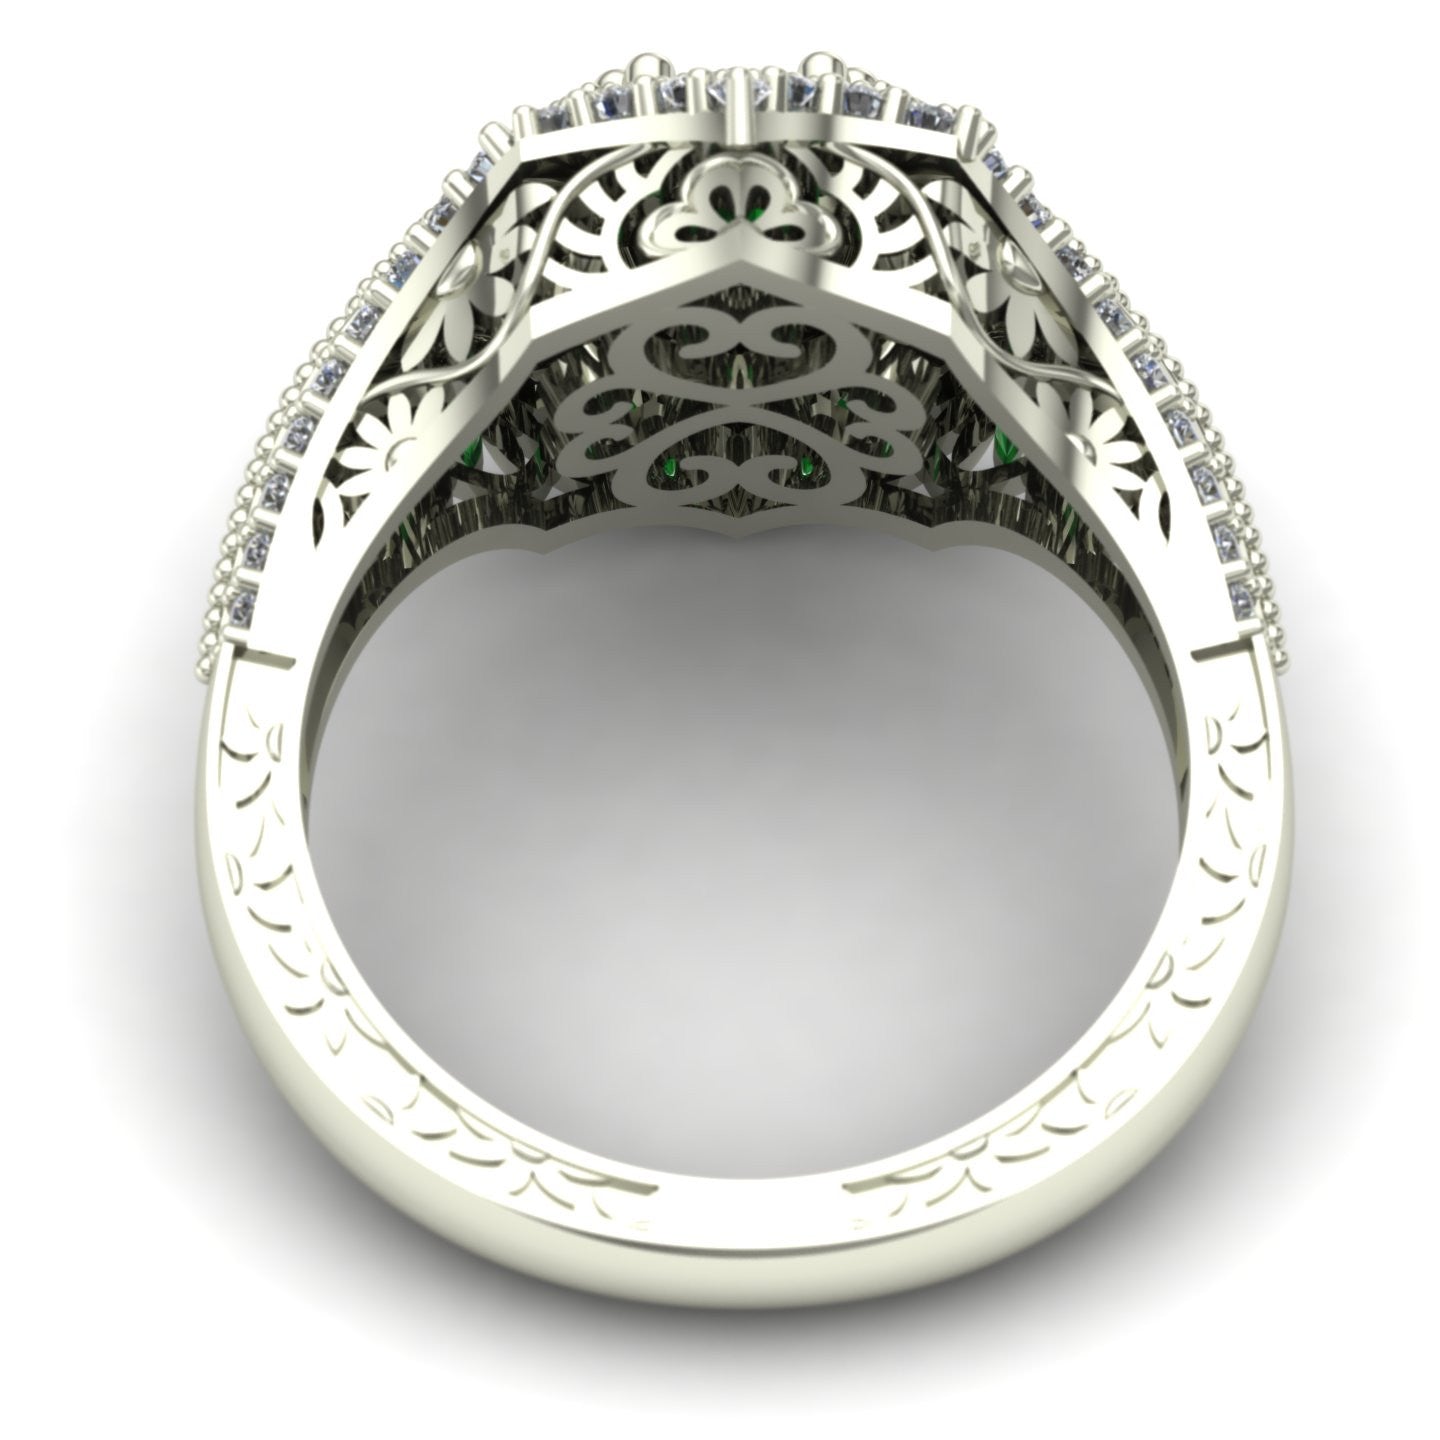 Emerald and diamond ring with floral carving in 14k white gold - Charles Babb Designs - through finger view